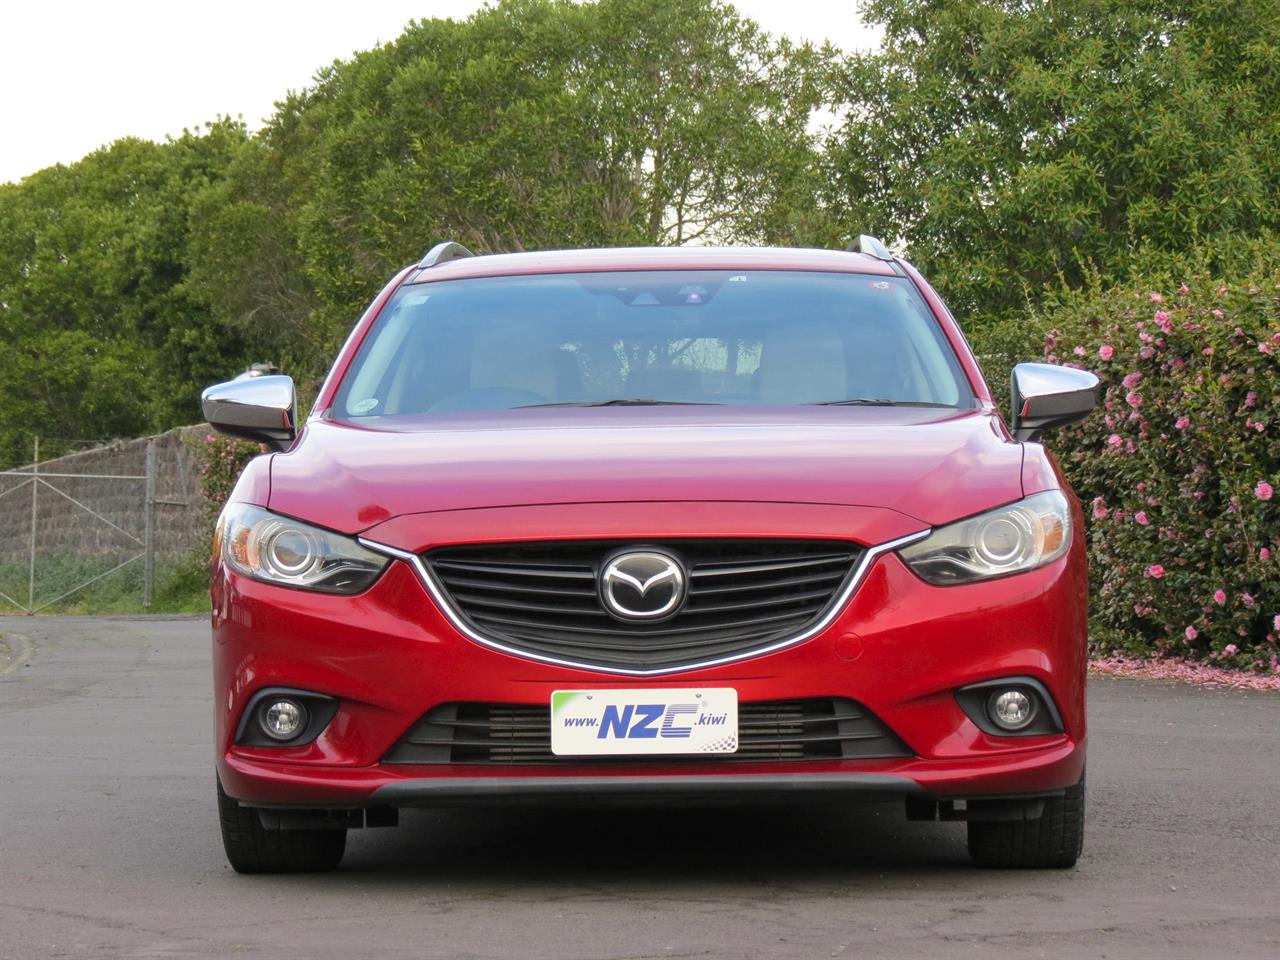 2014 Mazda Atenza only $51 weekly